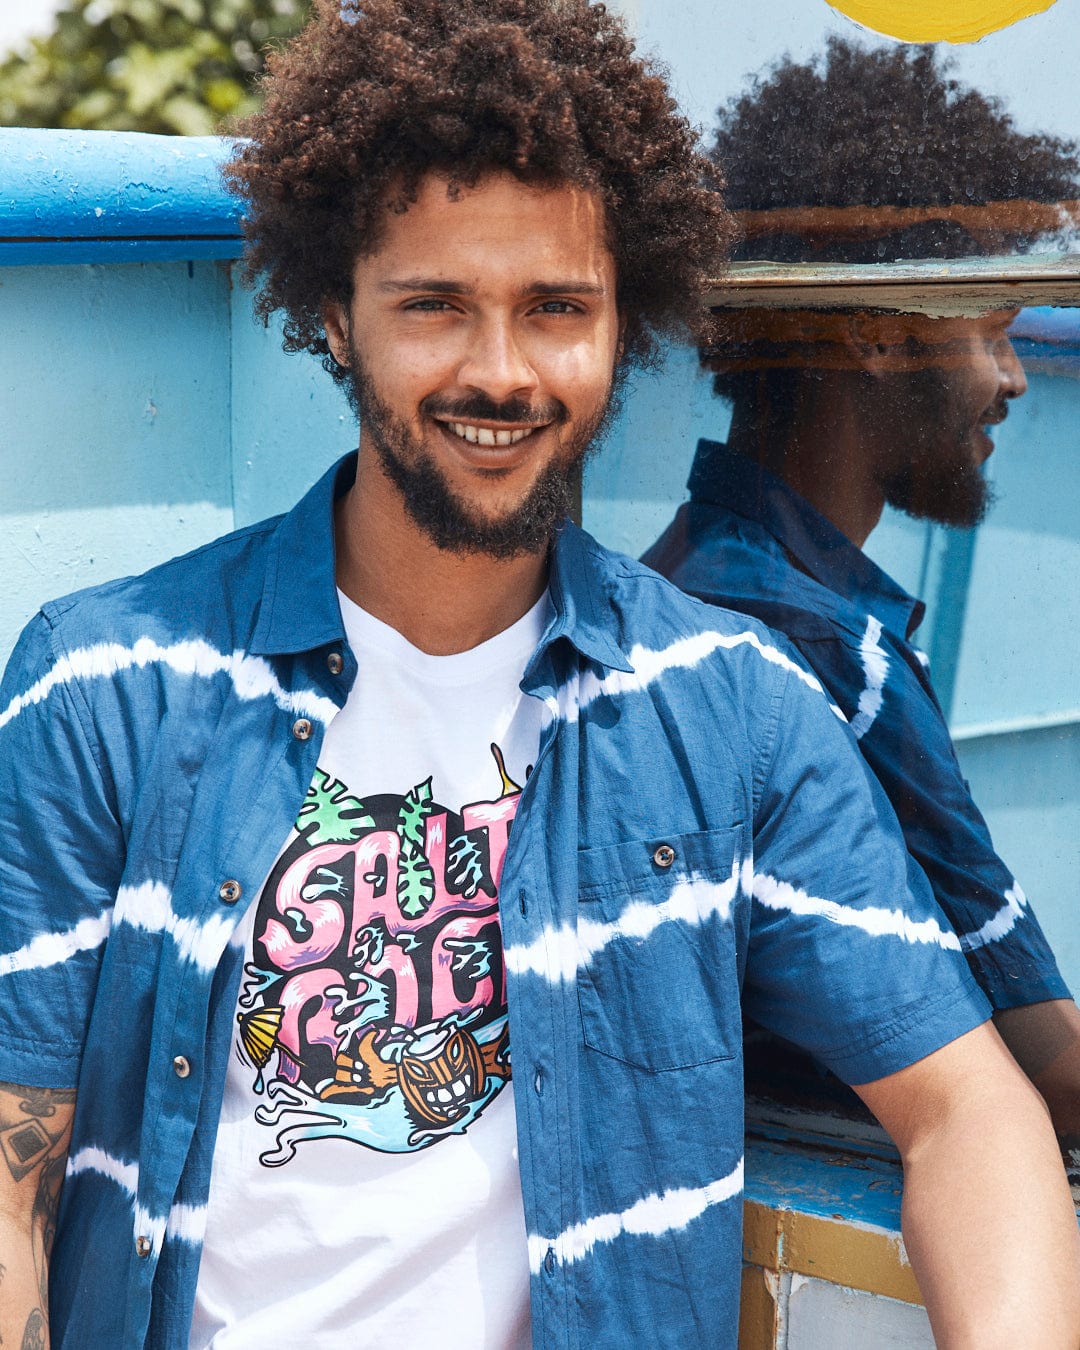 A young man with curly hair smiling at the camera, wearing a Saltrock Ocean - Mens Tie Dye Shirt in Blue and blue open shirt, leaning against a colorful wooden structure.